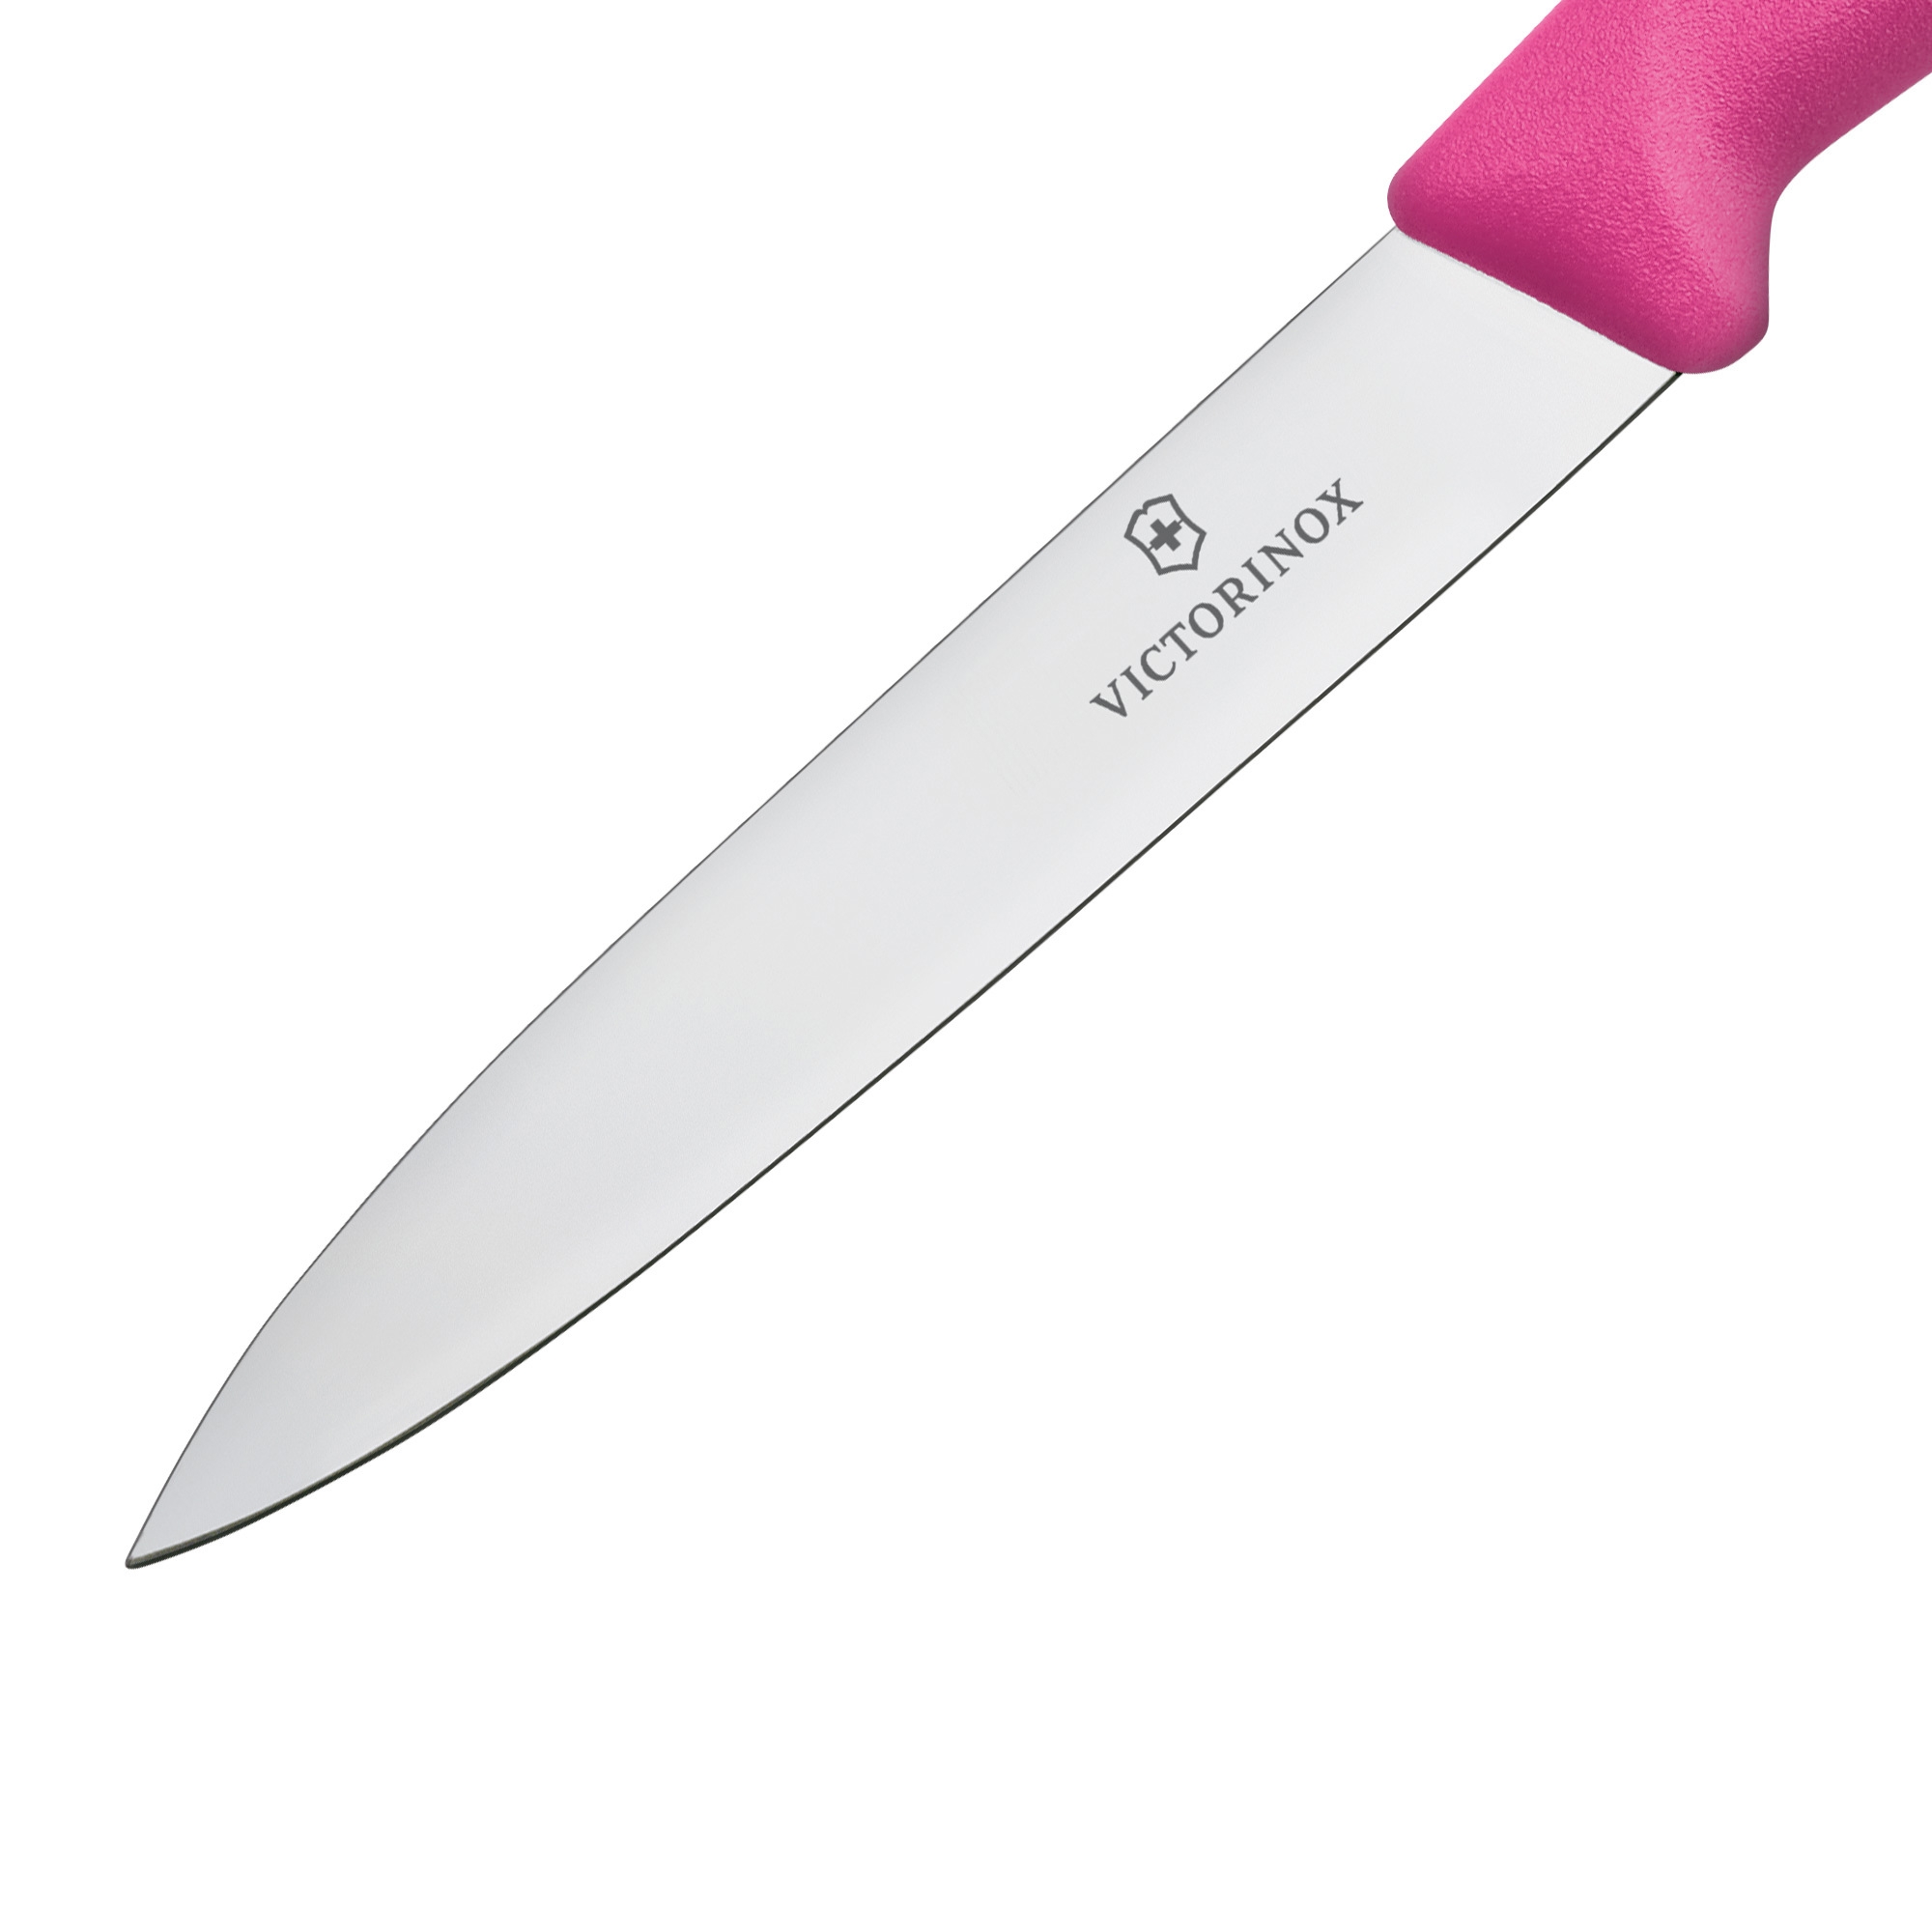 Victorinox Swiss Classic Pointed Tip Vegetable Knife 10cm Pink Image 2